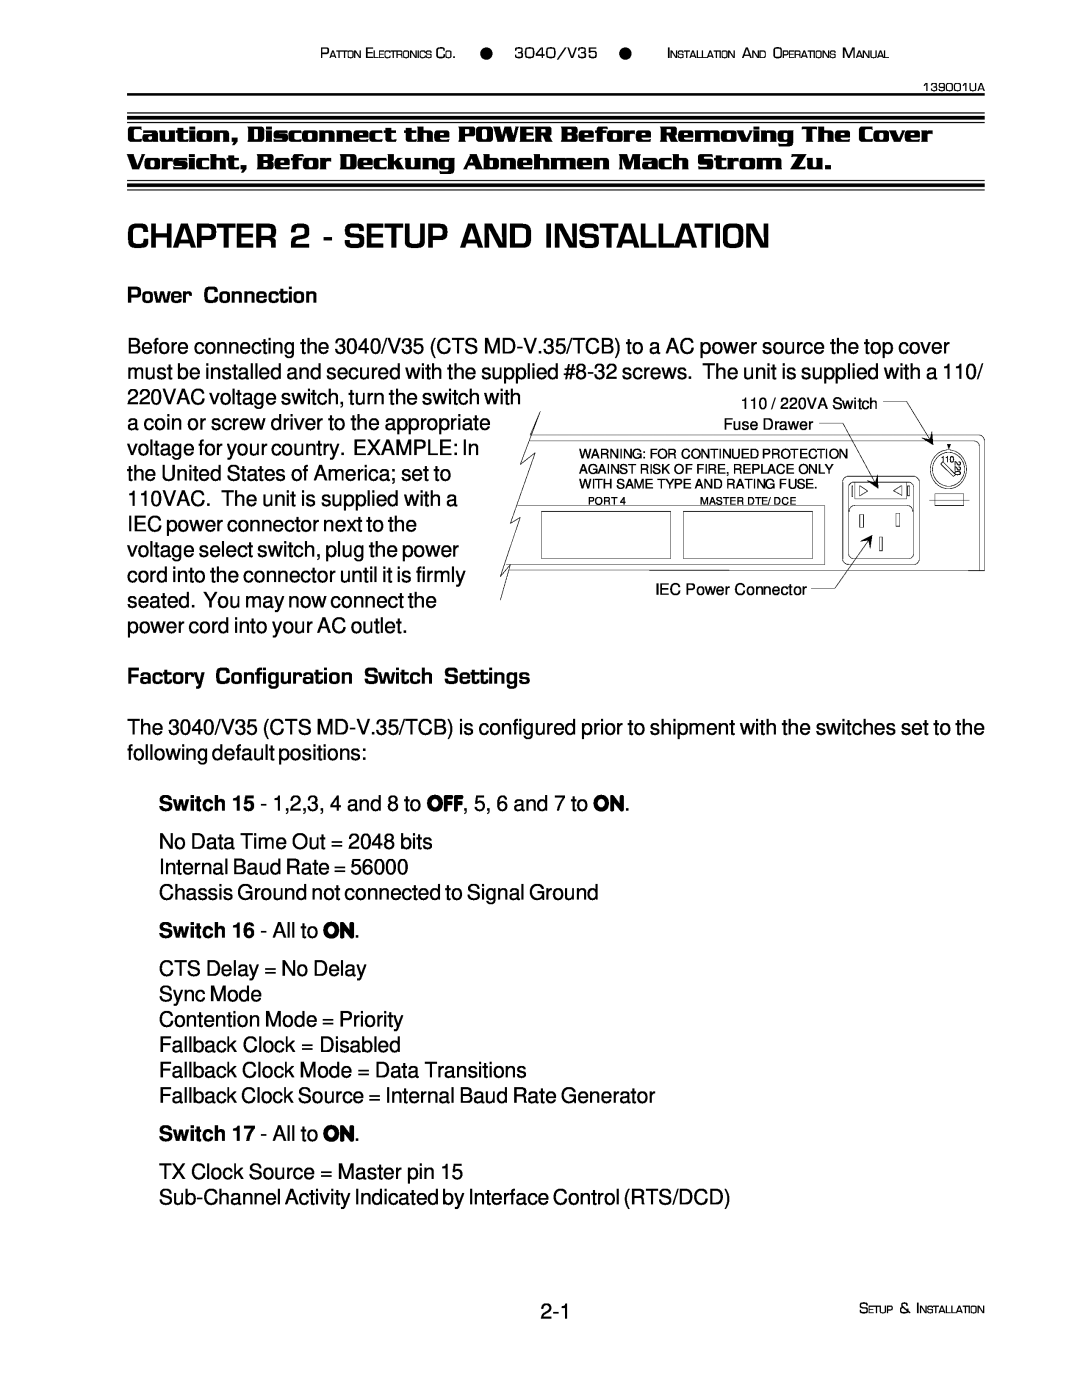 Patton electronic 3040/V35 manual Setup And Installation, Power Connection, Factory Configuration Switch Settings 